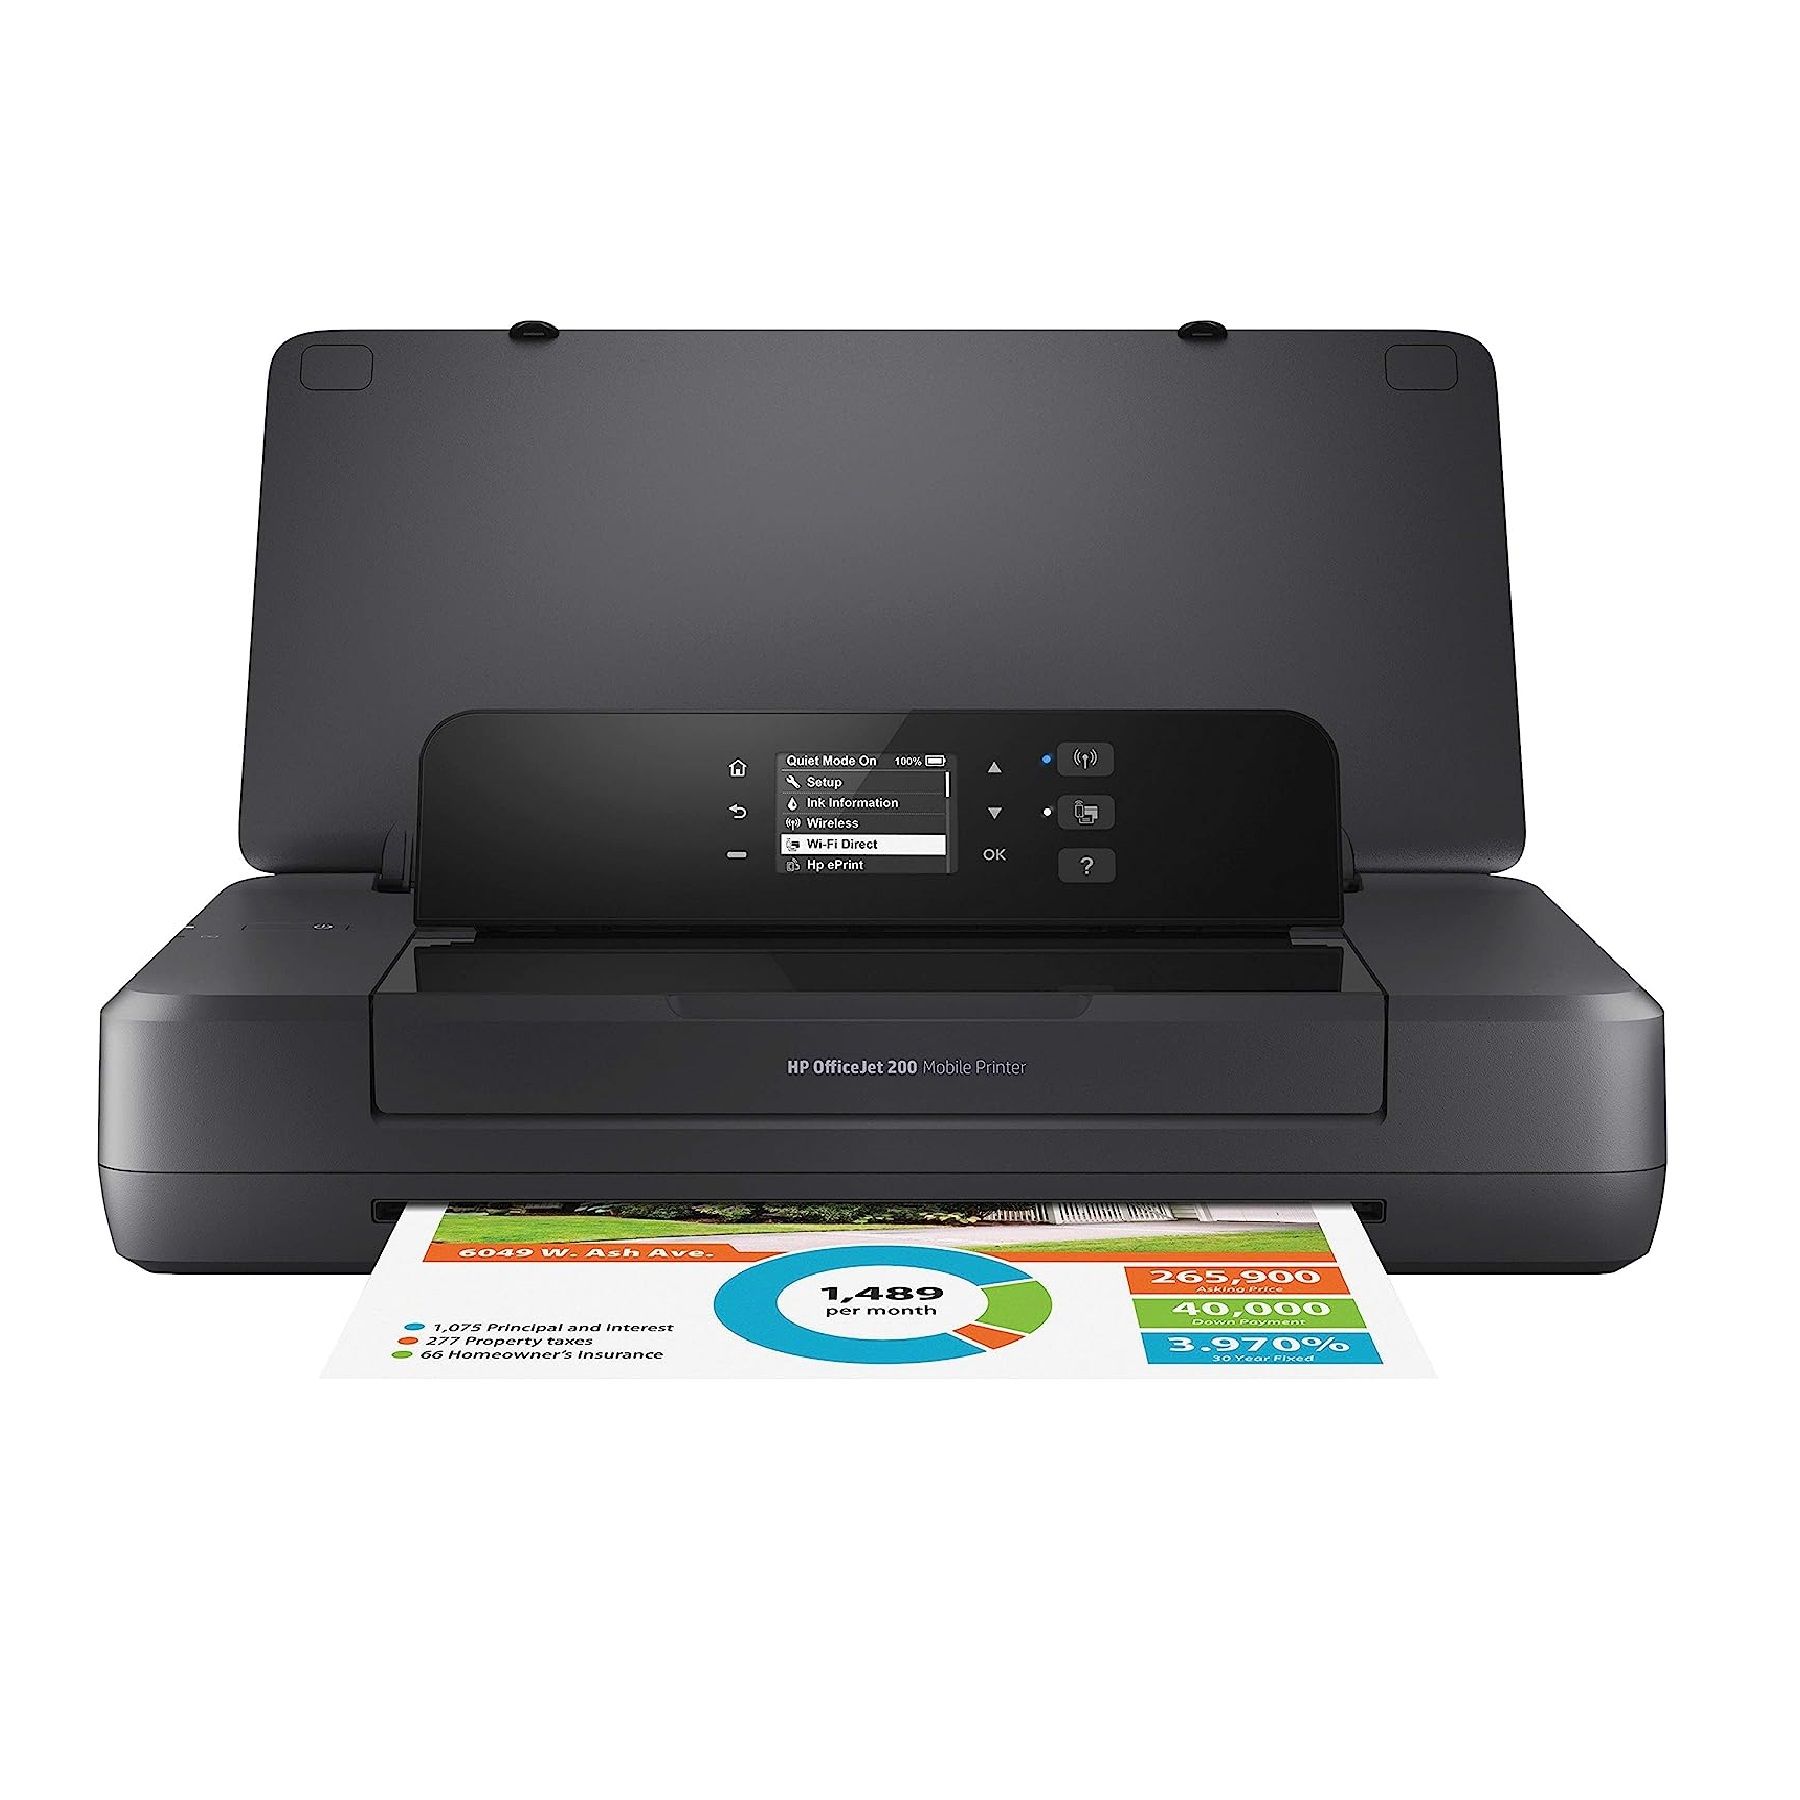 The HP OfficeJet 200 Portable Printer